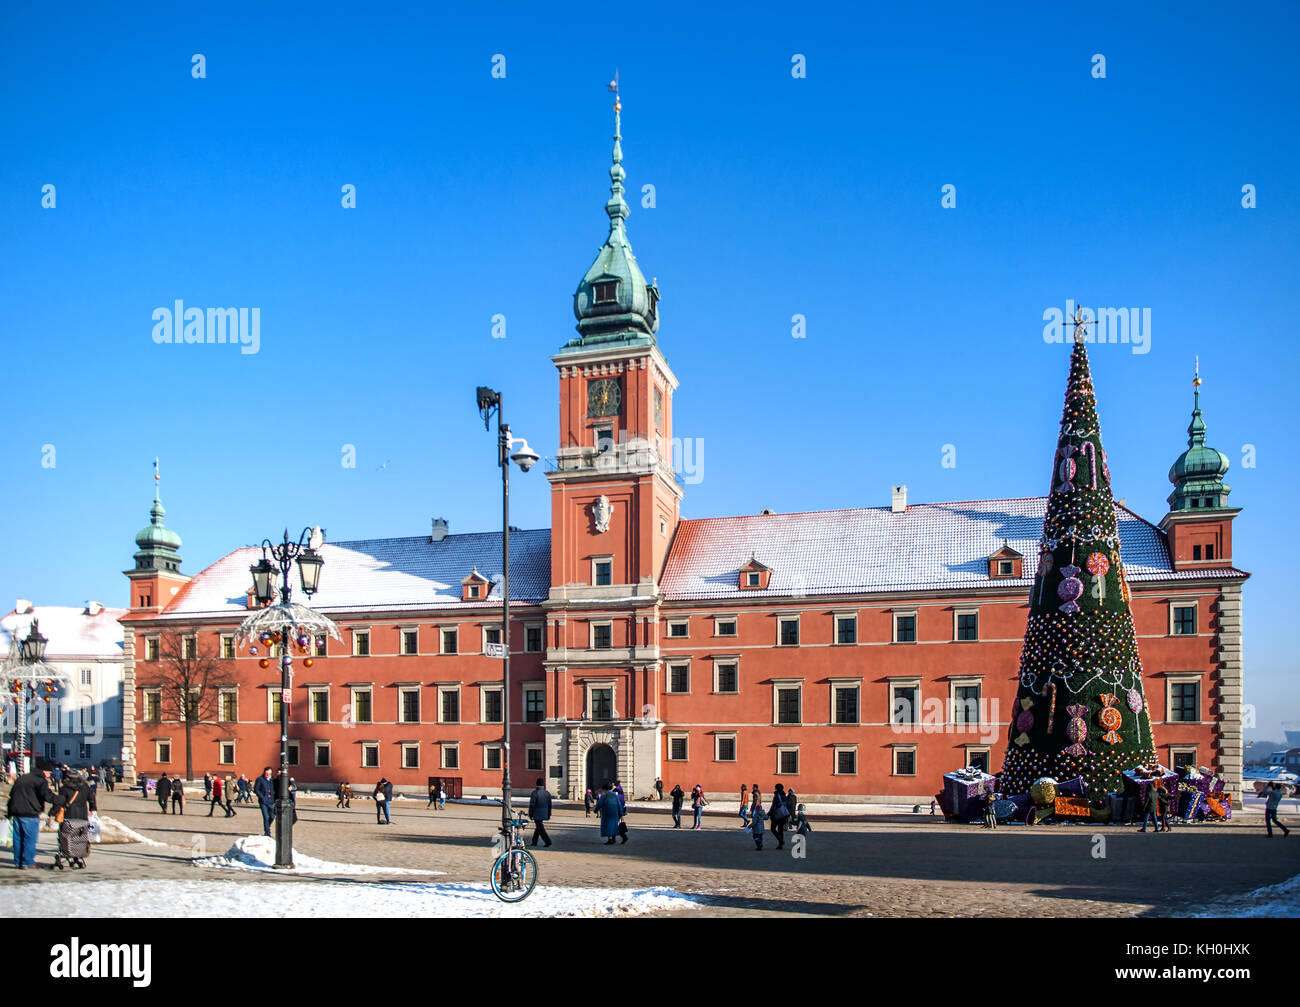 WARSZAWA, POLAND - JANUARY 23, 2016: Royal Castle in Warsaw, Poland,  in winter, with Christmas tree, gifts, presents and walking people Stock Photo